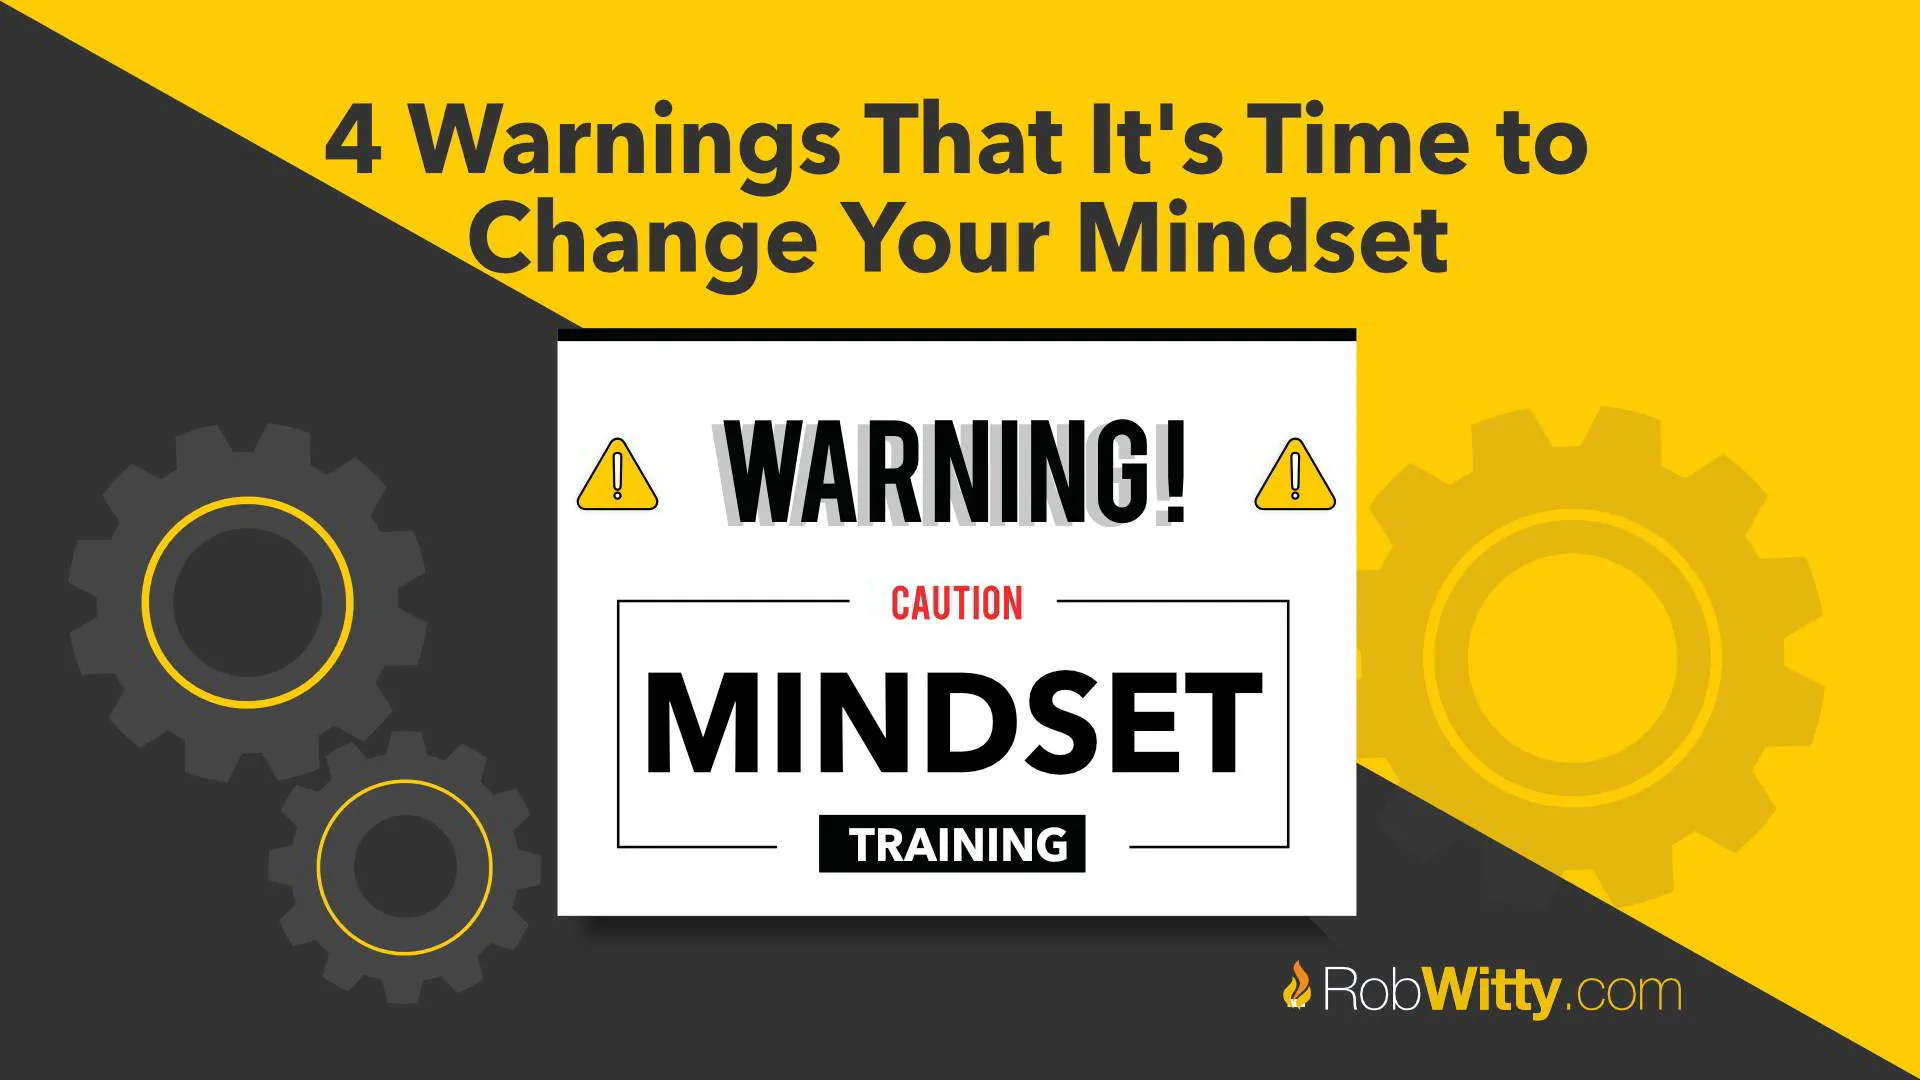 4 Warnings That It's Time to Change Your Mindset